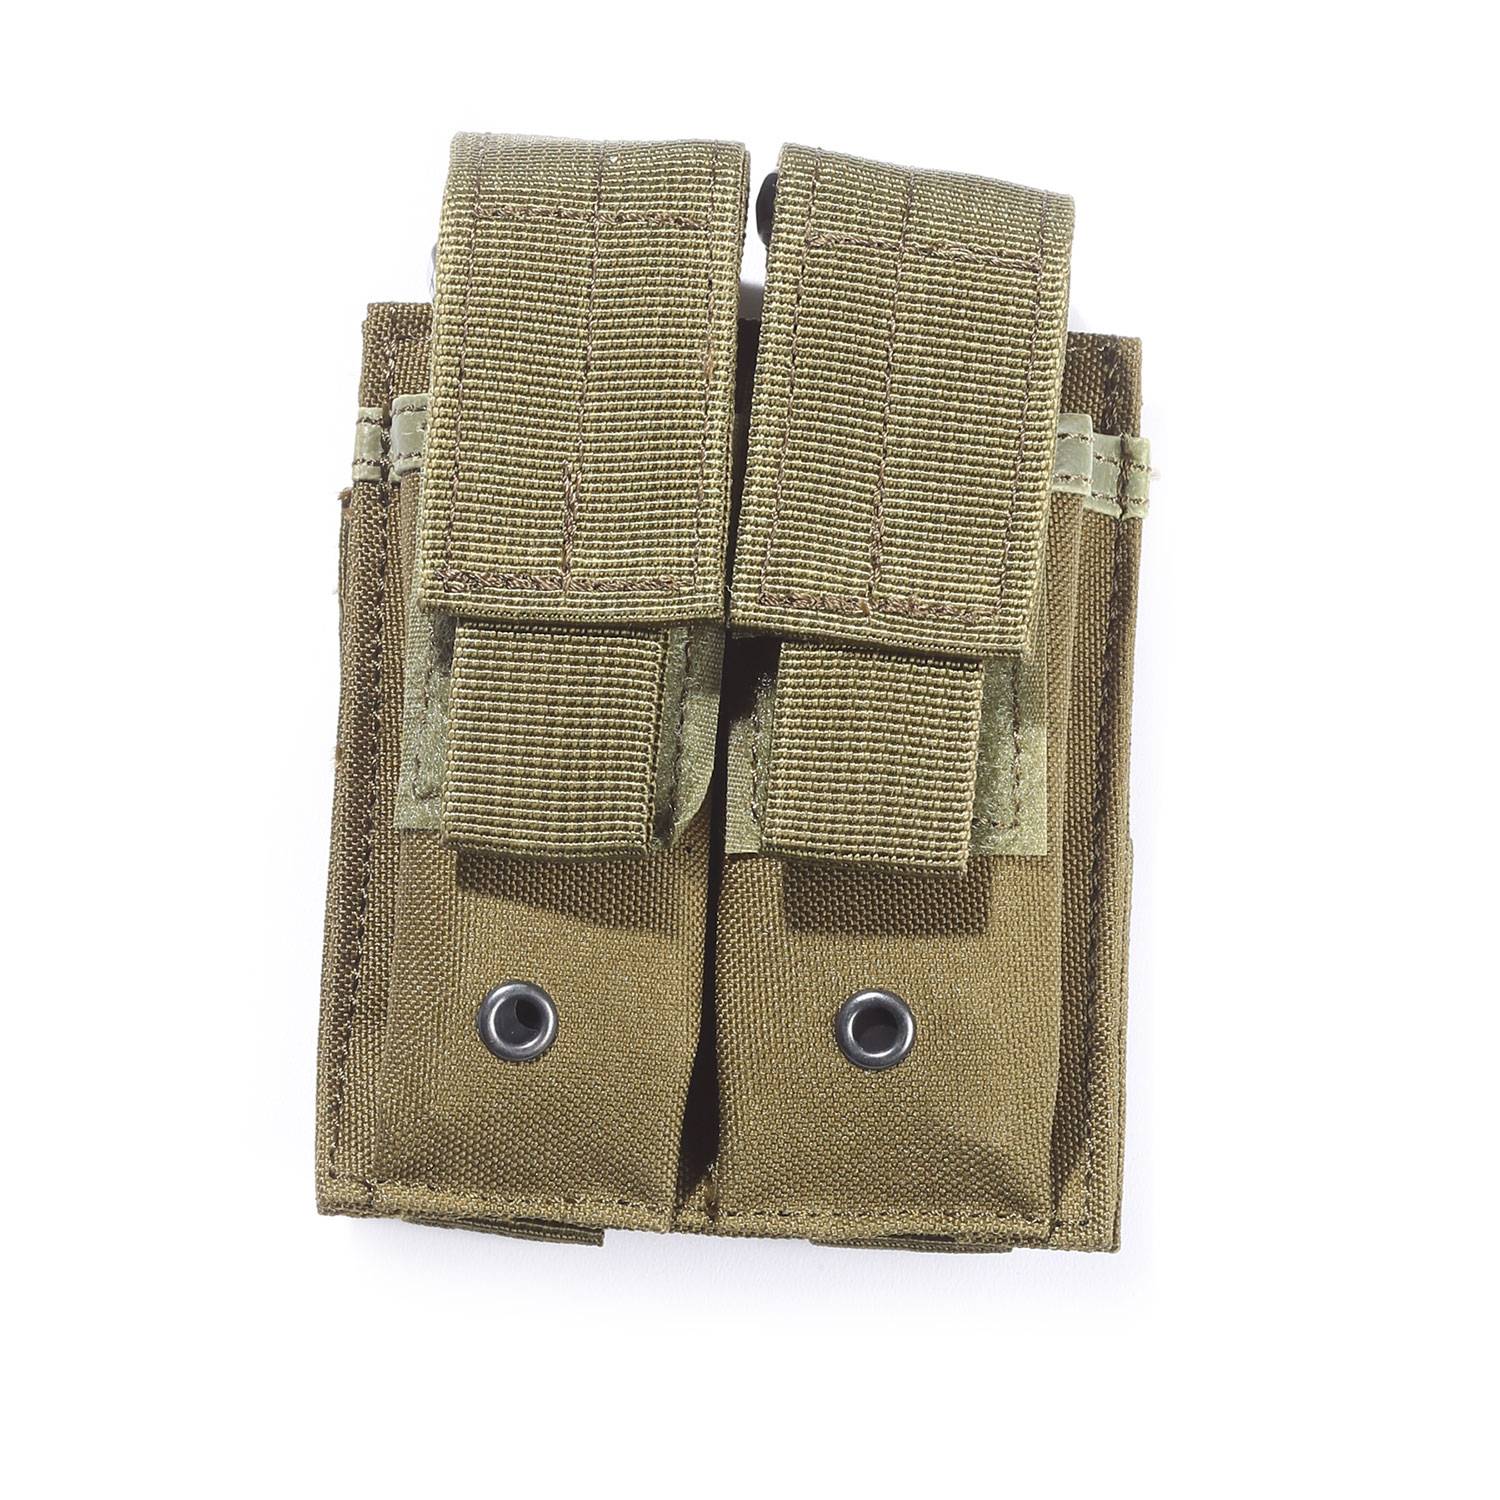 5IVE STAR GEAR MPD-5S DOUBLE PISTOL MAG POUCH